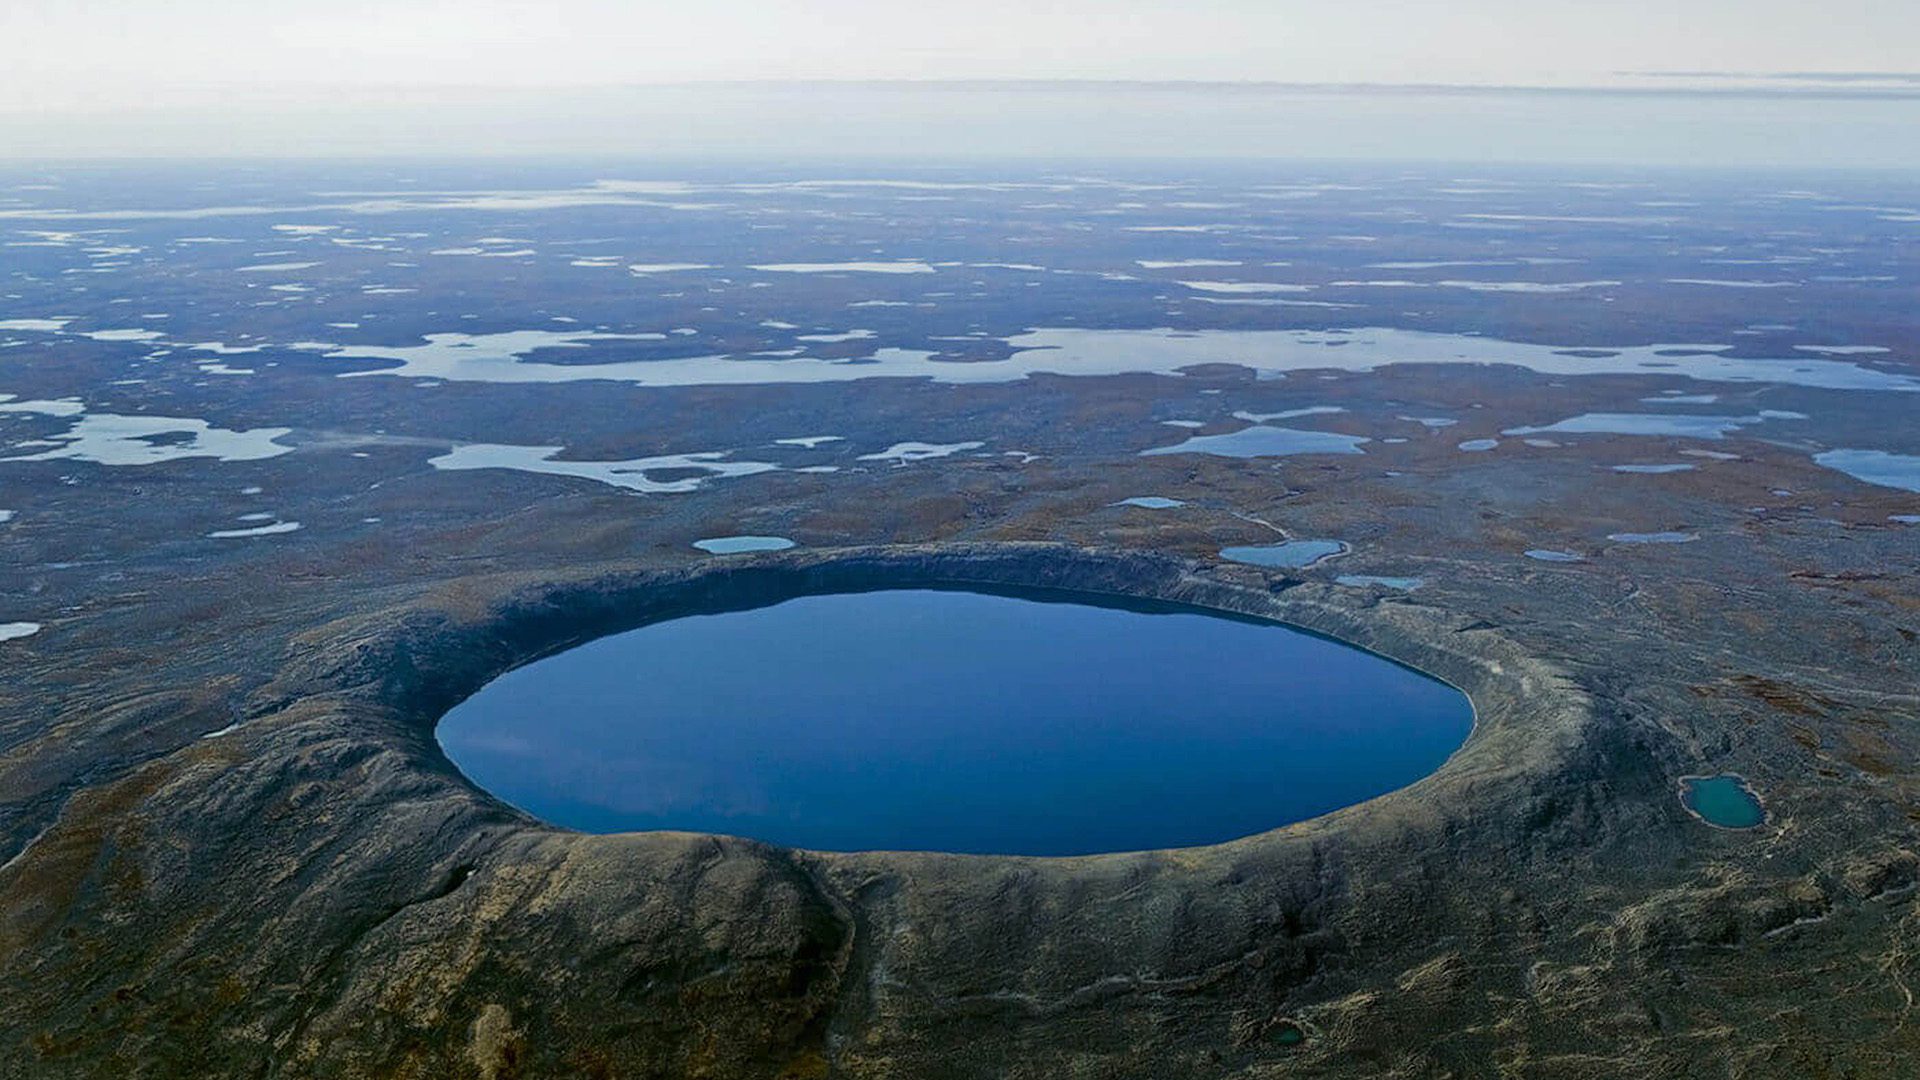 The edges of the Pingualuit rise 160 meters and a lake has formed inside due to snow and rain (Photo: Quebec Tourist Office)